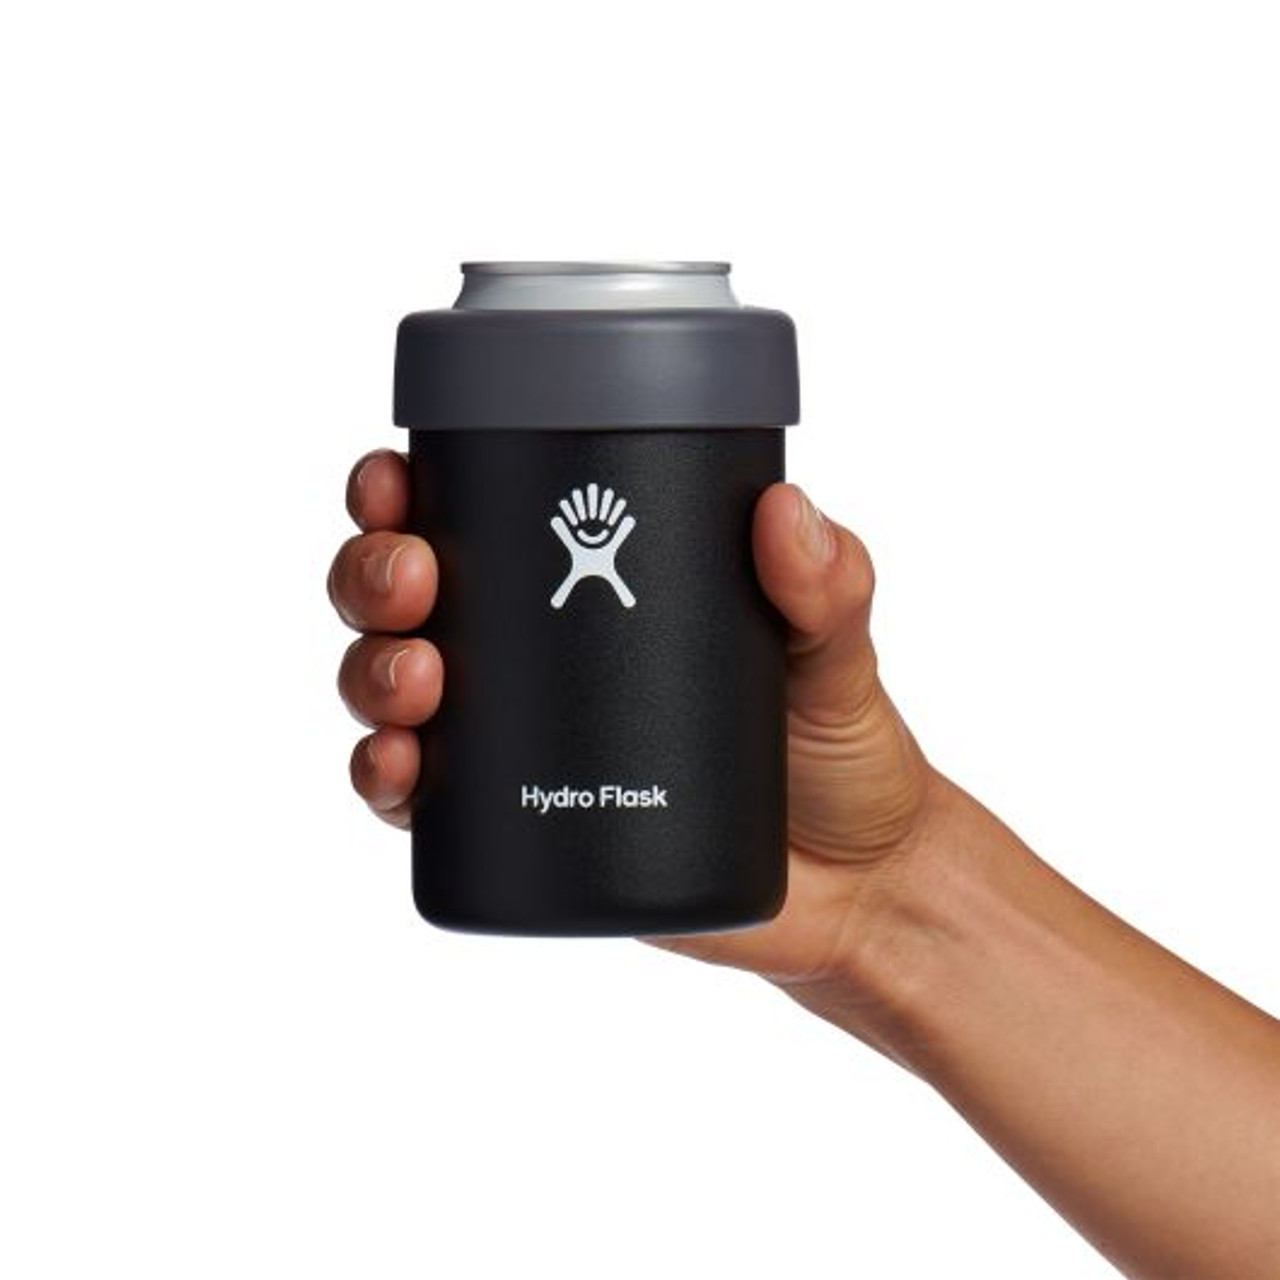 Hydro Flask Cooler Cup, Black, 12 oz D&B Supply